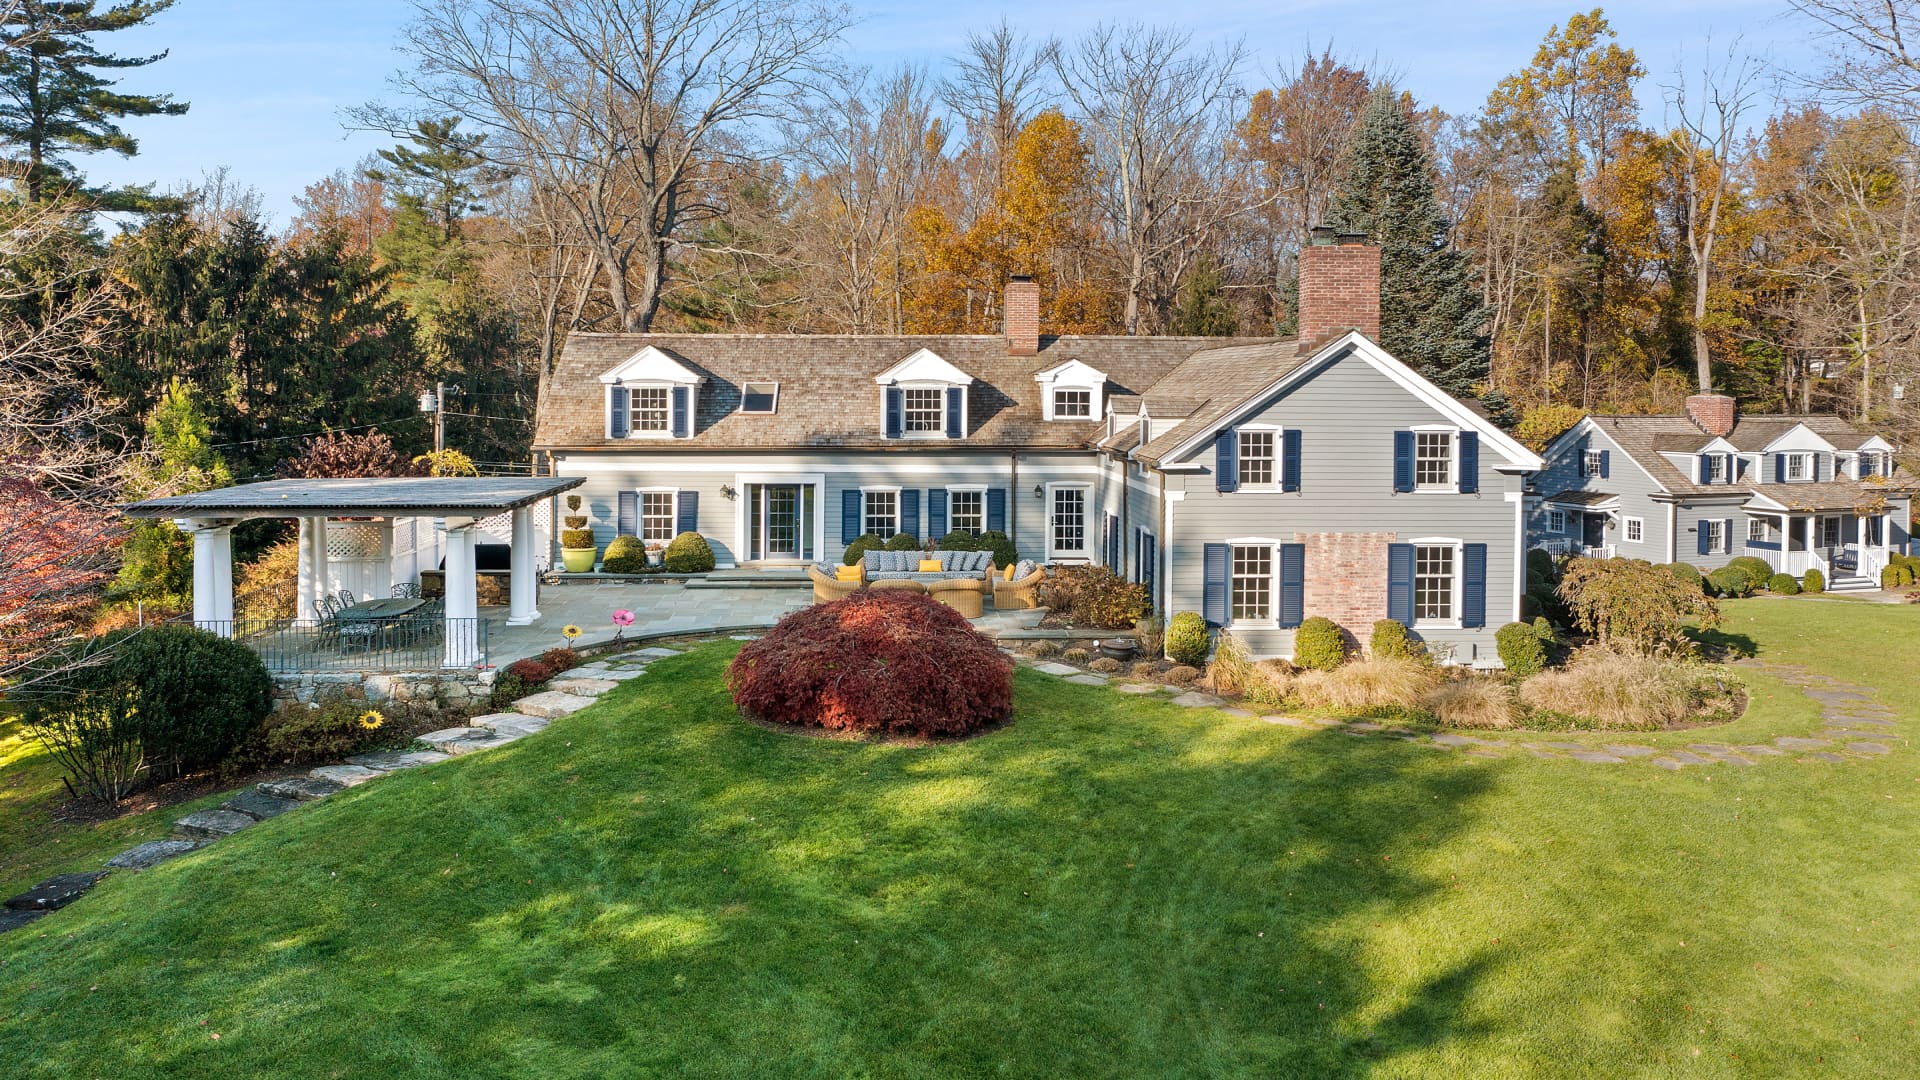 Greenwich mansion for sale will take bitcoin cryptocurrency as payment